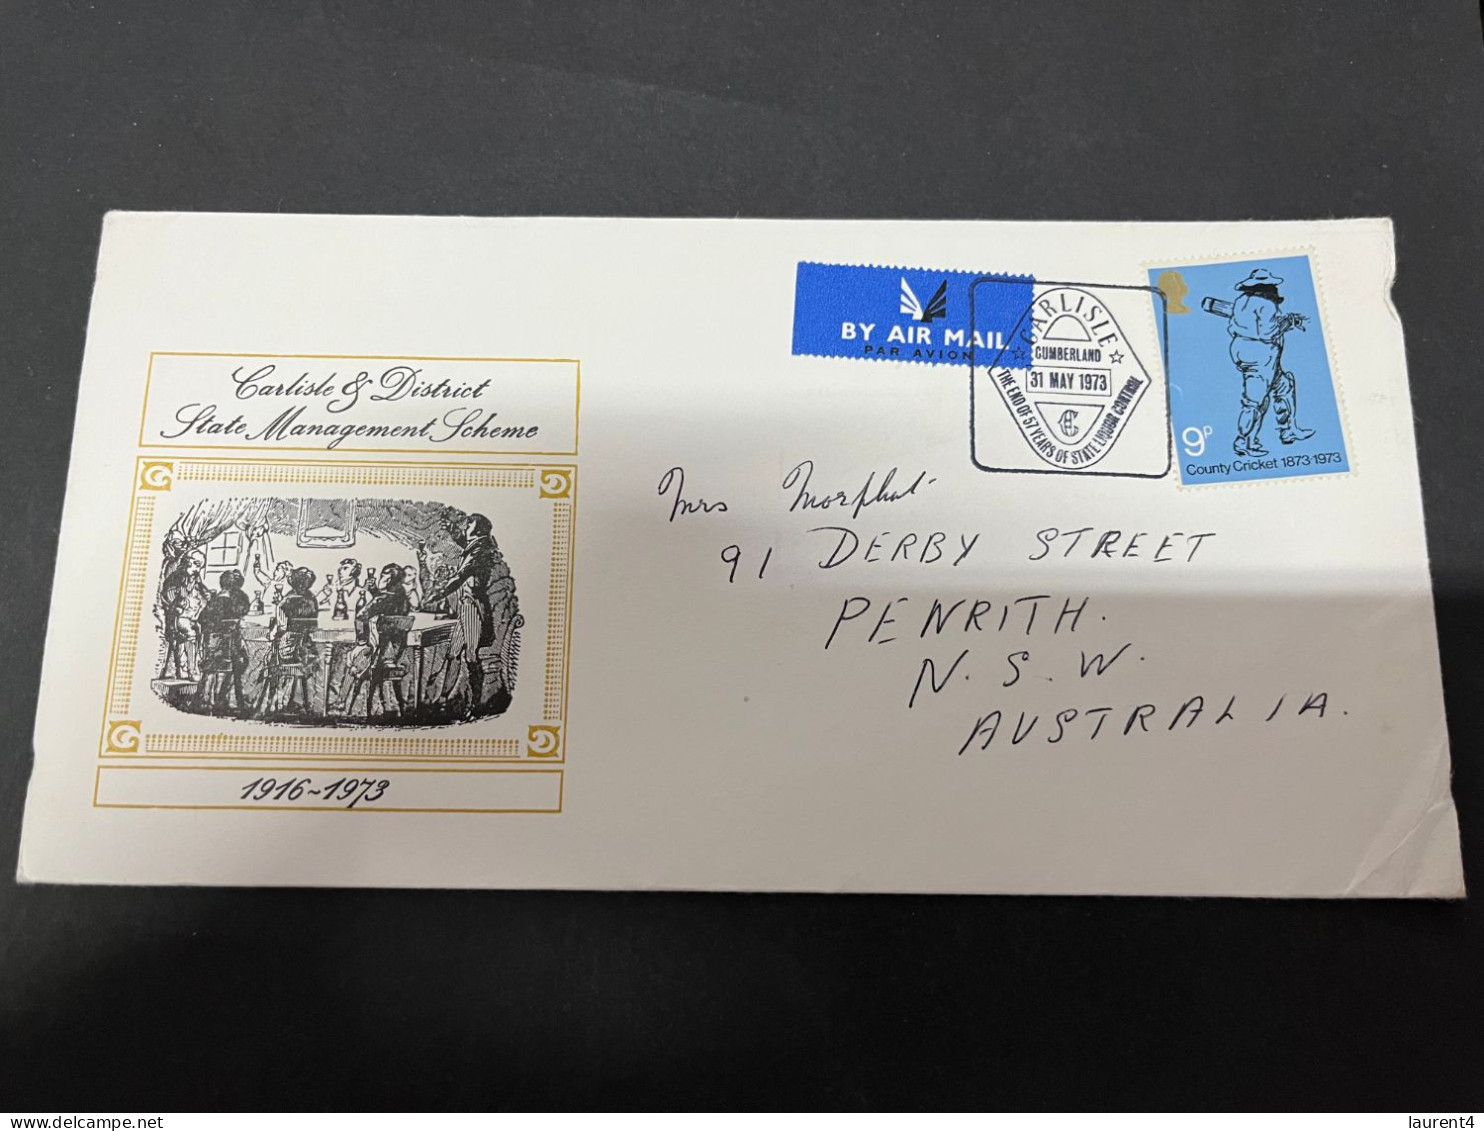 25-9-2023 (2 U 9) UK FDC Cover (1 Cover Posted To Australia Under-paid ? 1973) Carlisle (with Cricket 9p Stamp) + Insert - 1971-1980 Decimal Issues